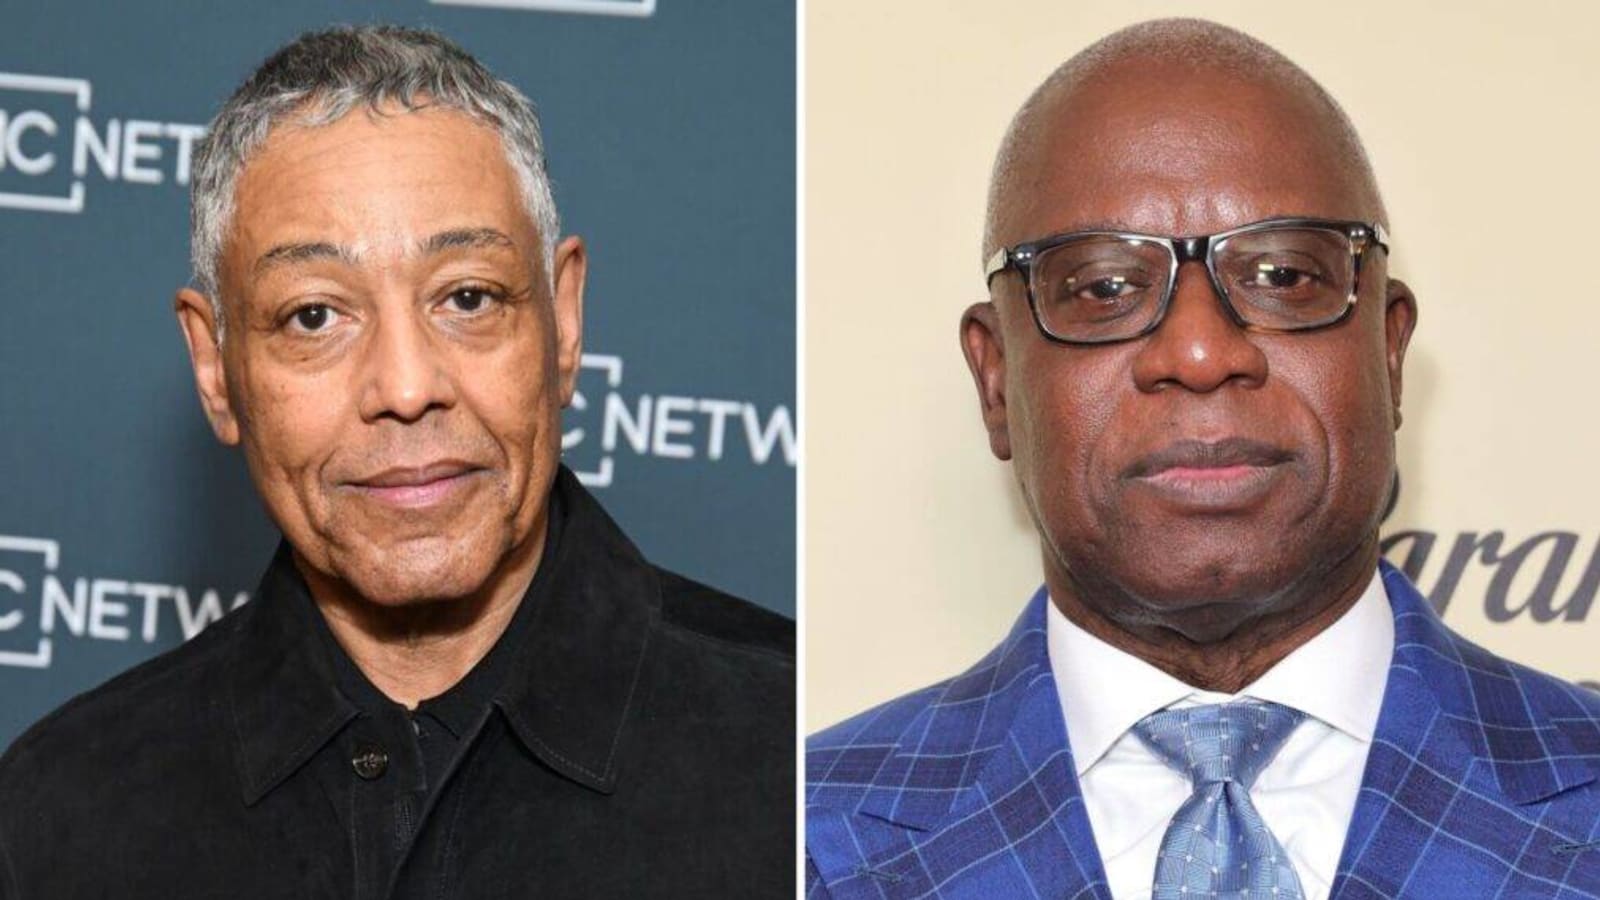 Giancarlo Esposito Takes Over Late Andre Braugher’s Role in Netflix’s ‘The Residence’